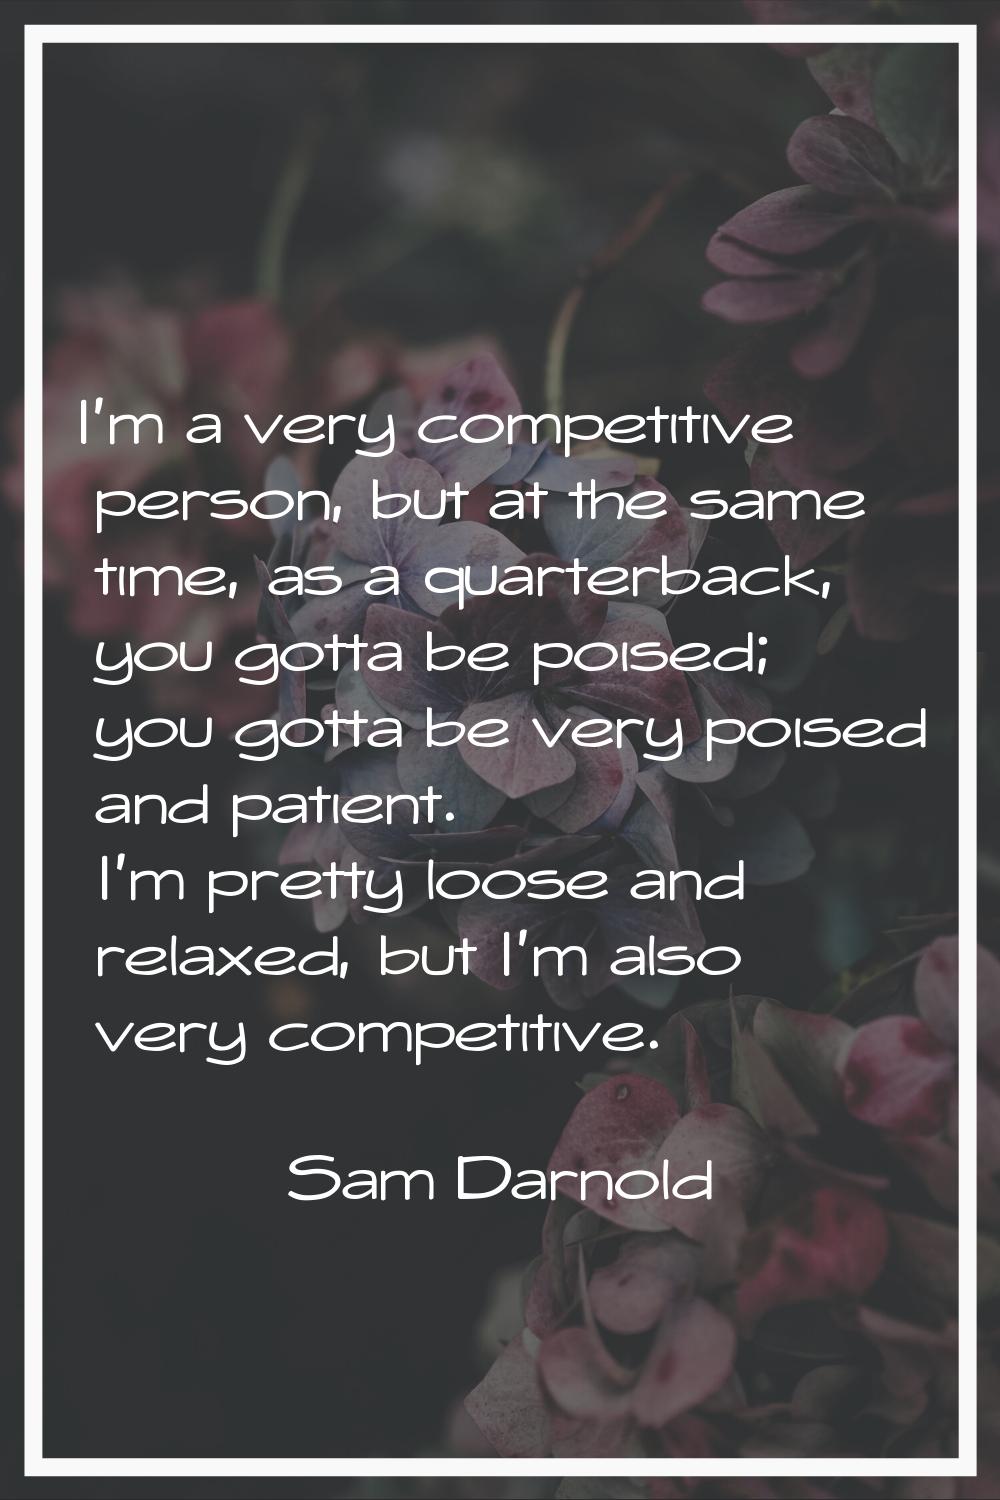 I'm a very competitive person, but at the same time, as a quarterback, you gotta be poised; you got